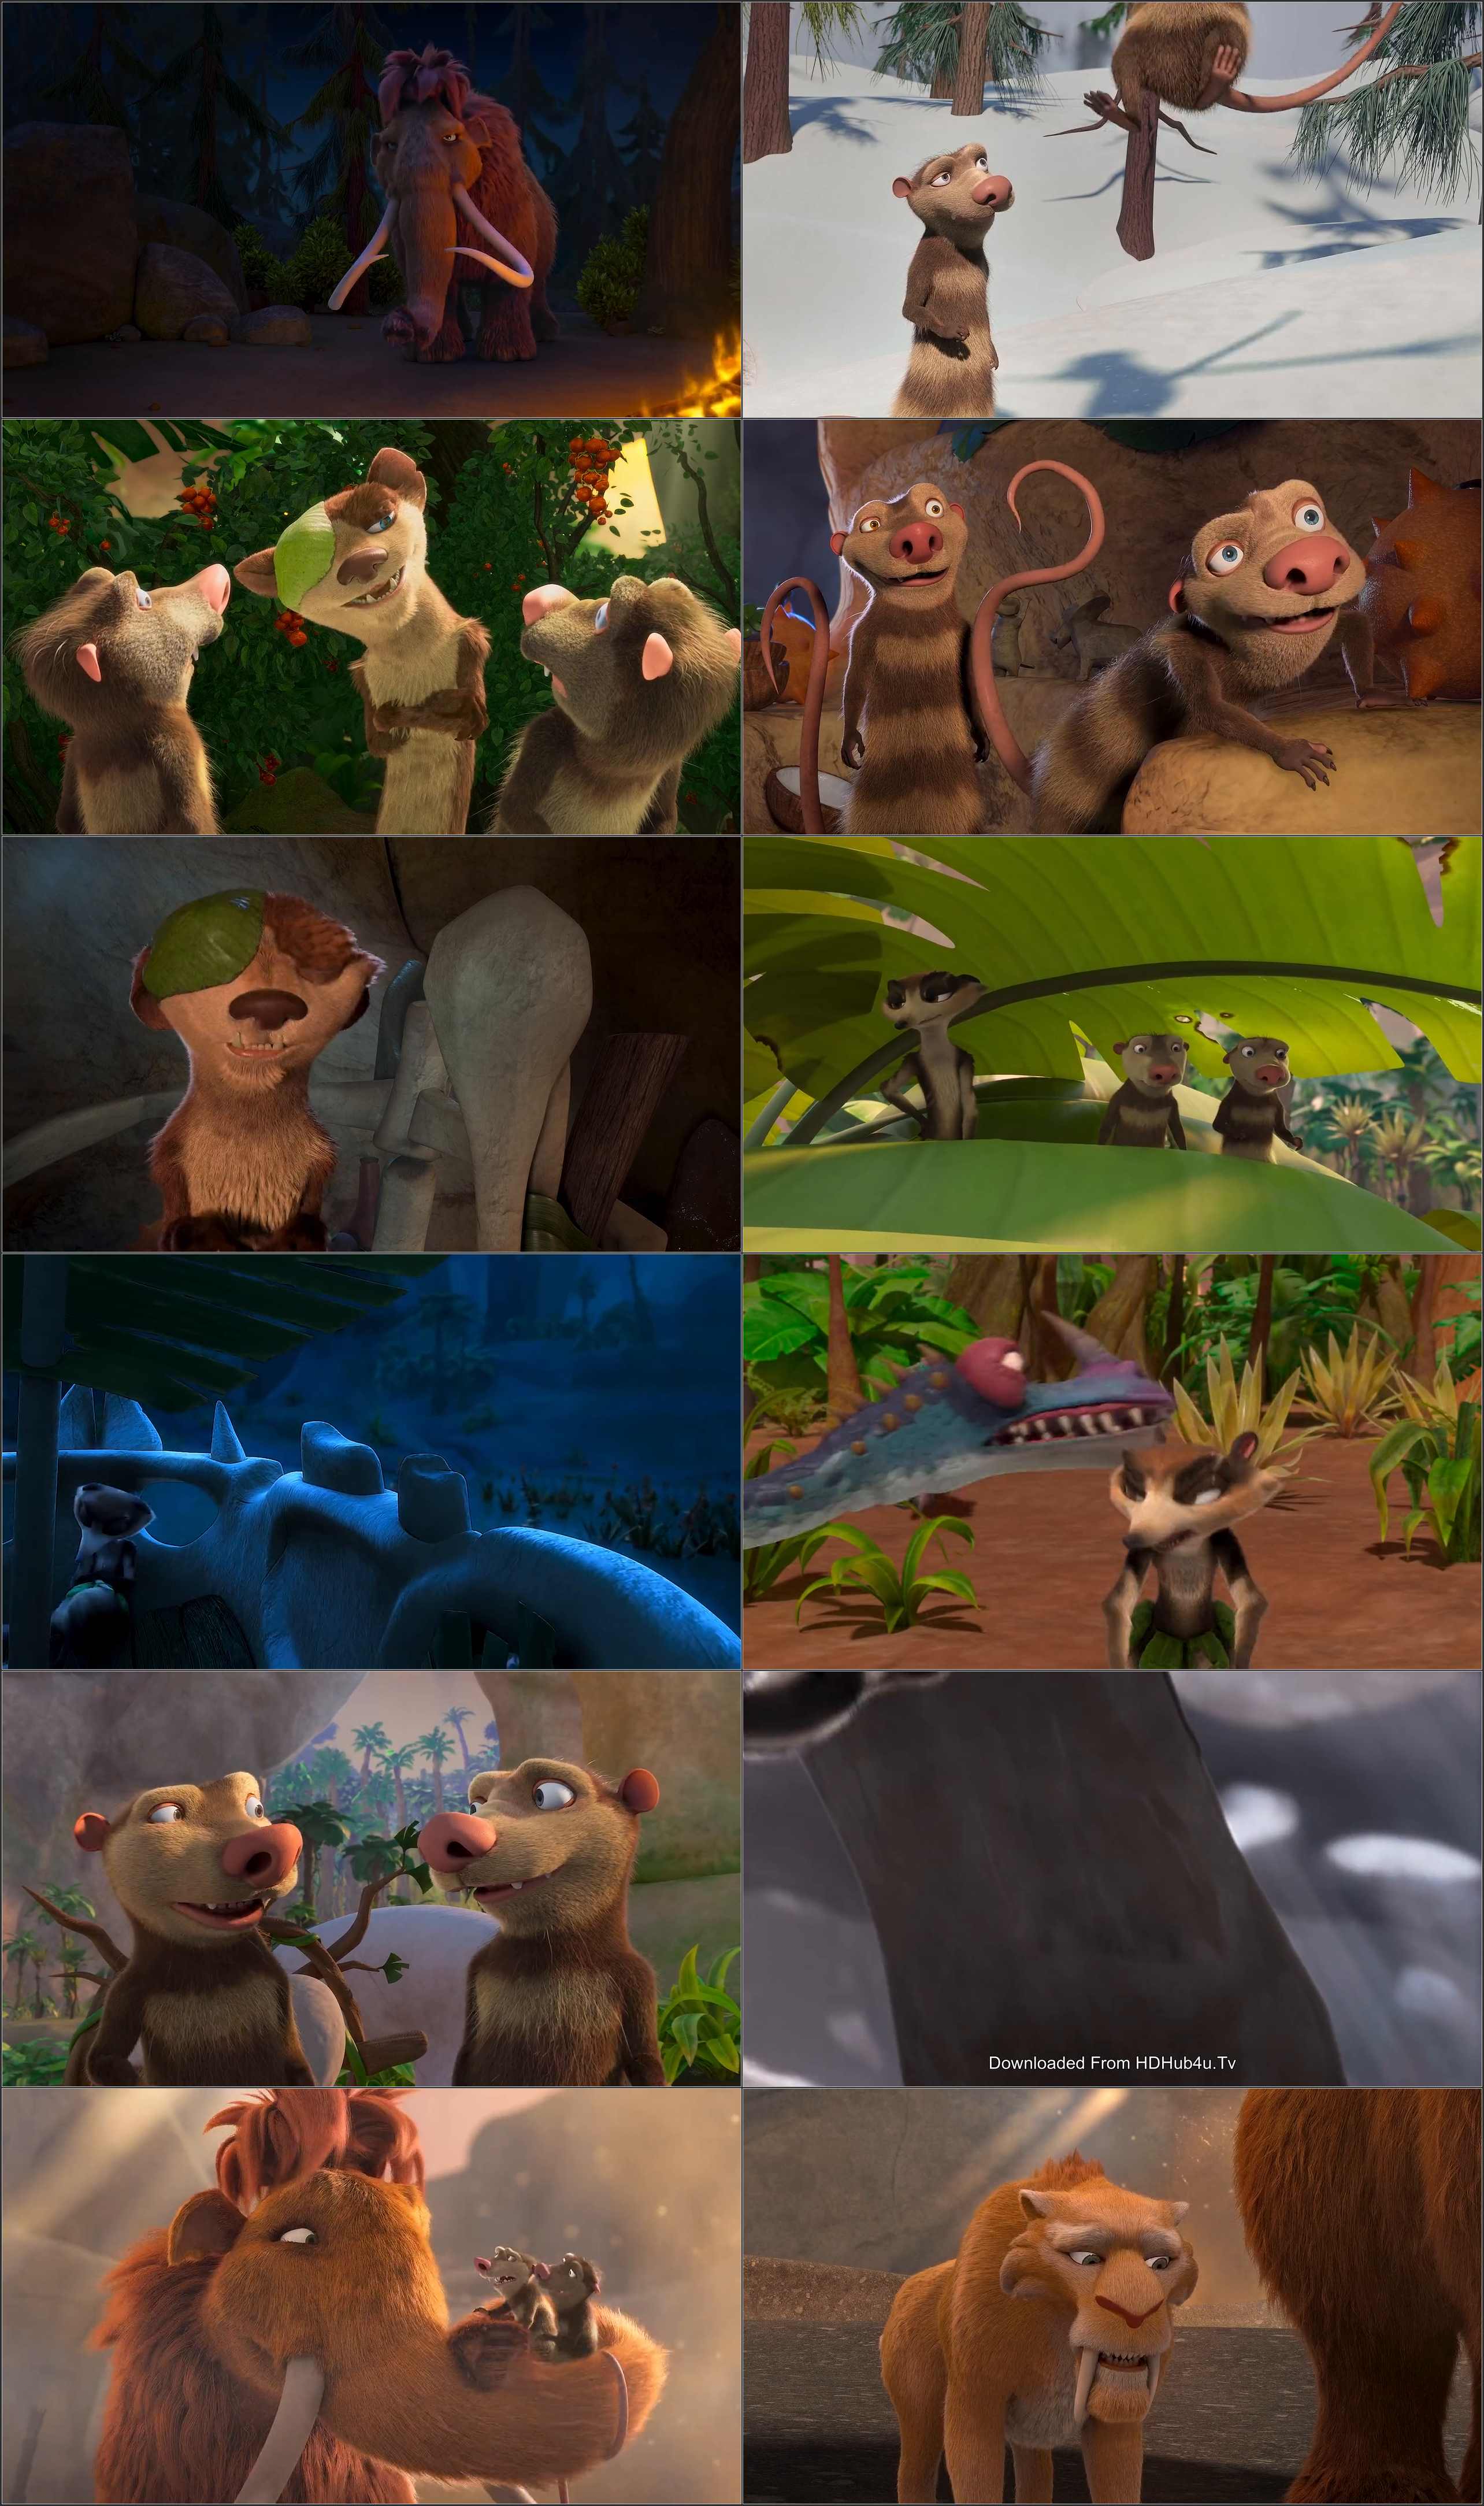  Screenshot Of The-Ice-Age-Adventures-of-Buck-Wild-2022-WEB-DL-Hollywood-English-Full-Movie-Download-In-Hd